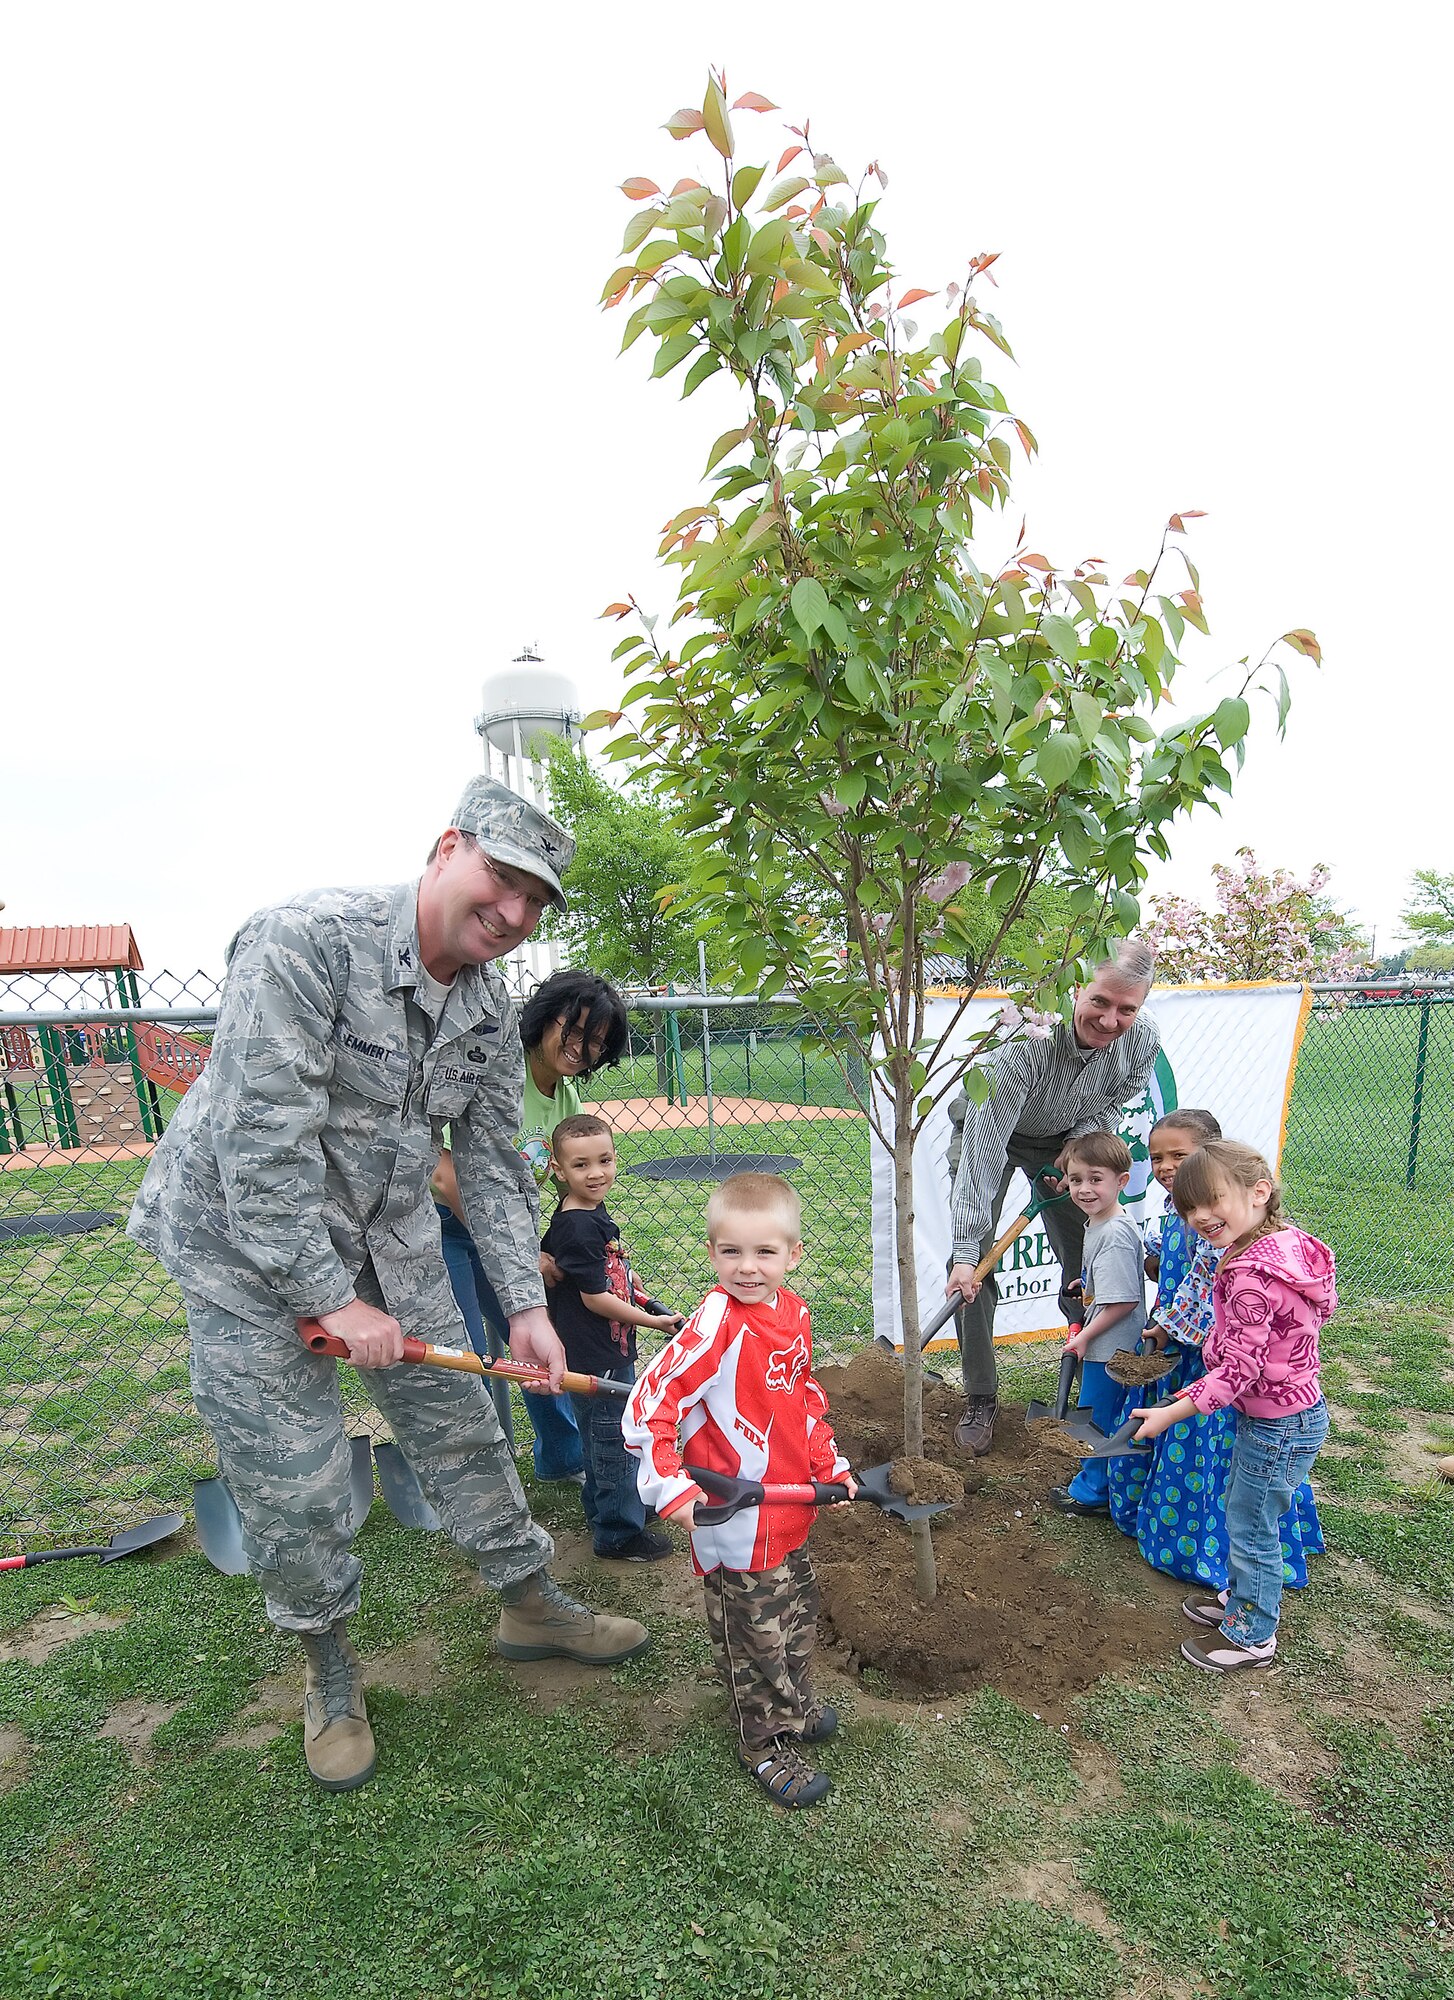 (Left) Col. Todd Emmert, 436th Maintenance Group commander, Child Development Center children and Michael Valenti, Delaware Forest Service acting state forester, work together to put the finishing touches on the tree planted for the 40th anniversary of Earth Day. The children used small spades to shovel in the dirt around the roots of the tree with the assistance of the two representatives. (U.S. Air Force photo/Brianne Zimny)